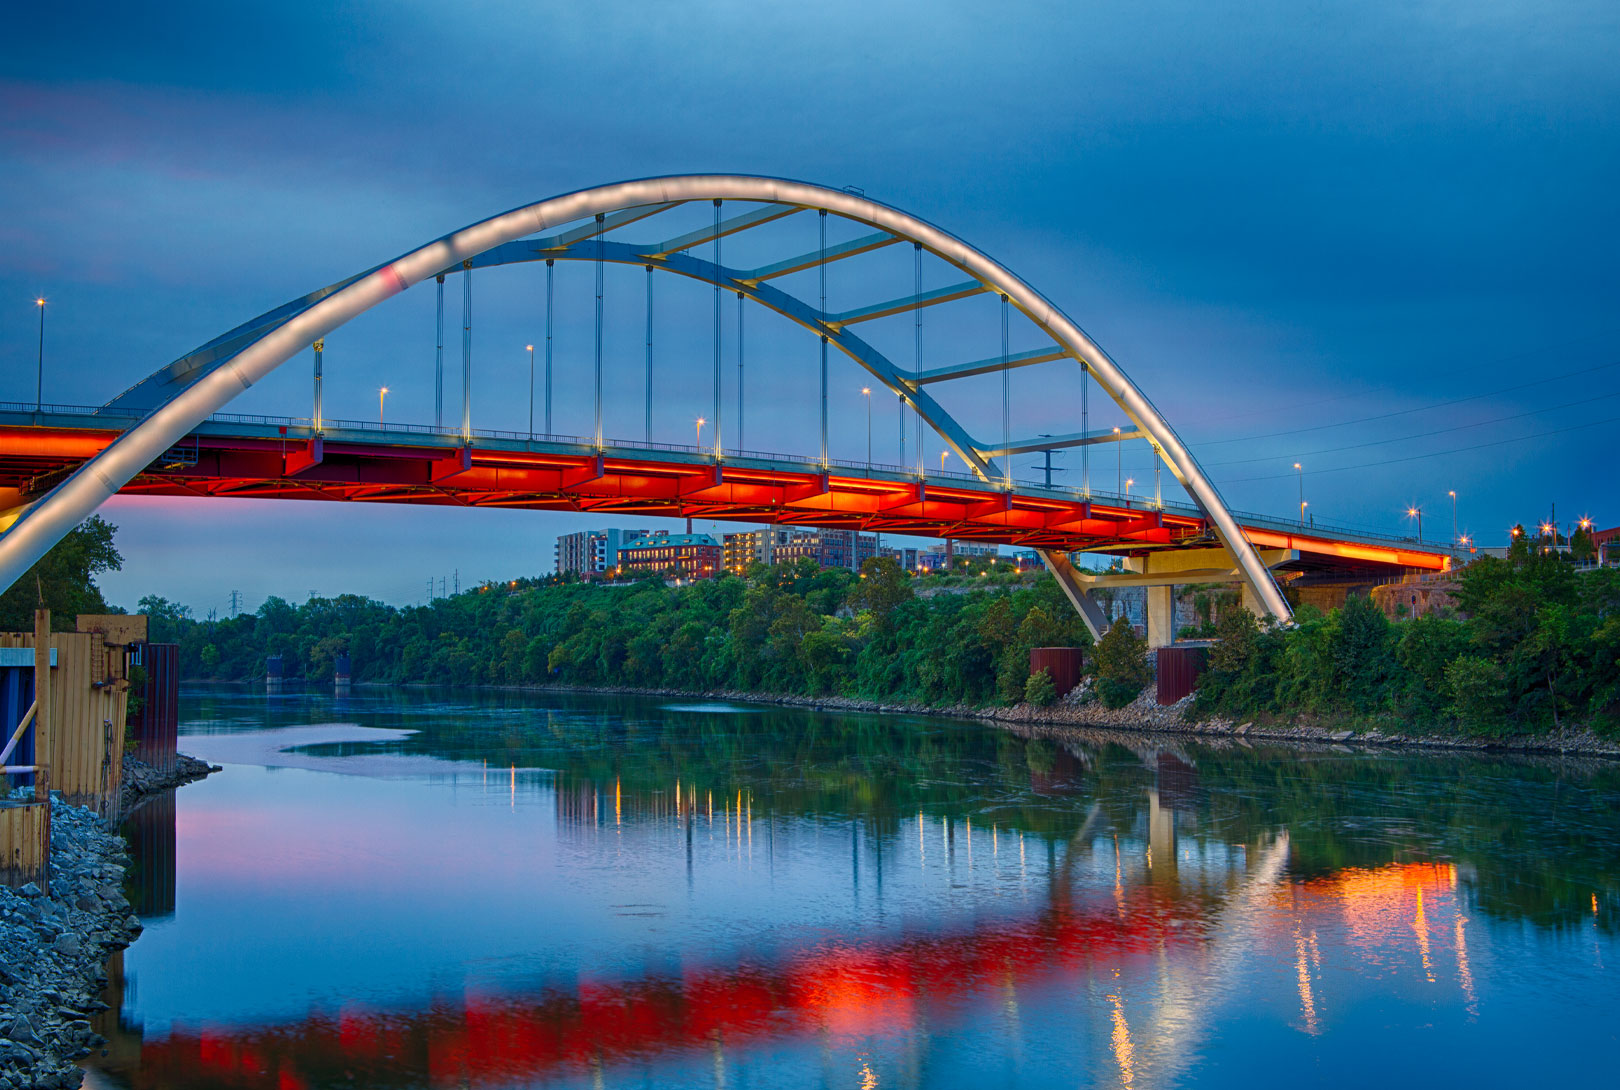 Nashville Korean War Veterans Bridge at sunrise with lights on and colorful reflections in the river